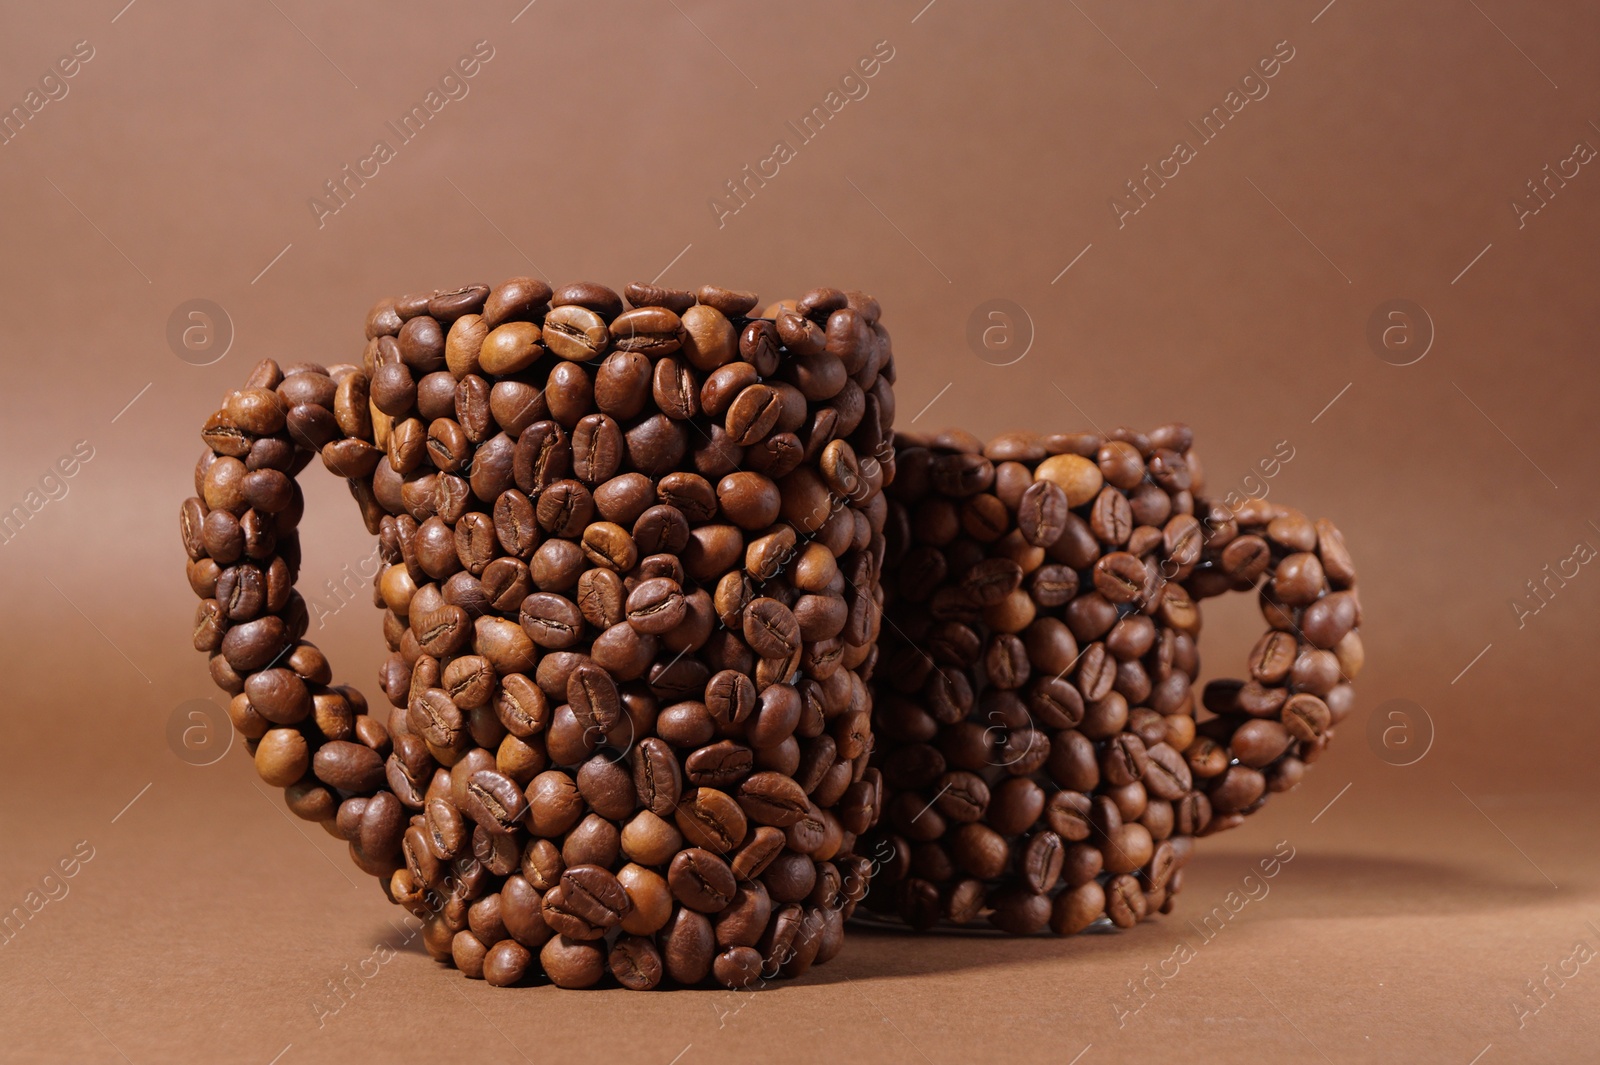 Photo of Cups made of coffee beans on brown background